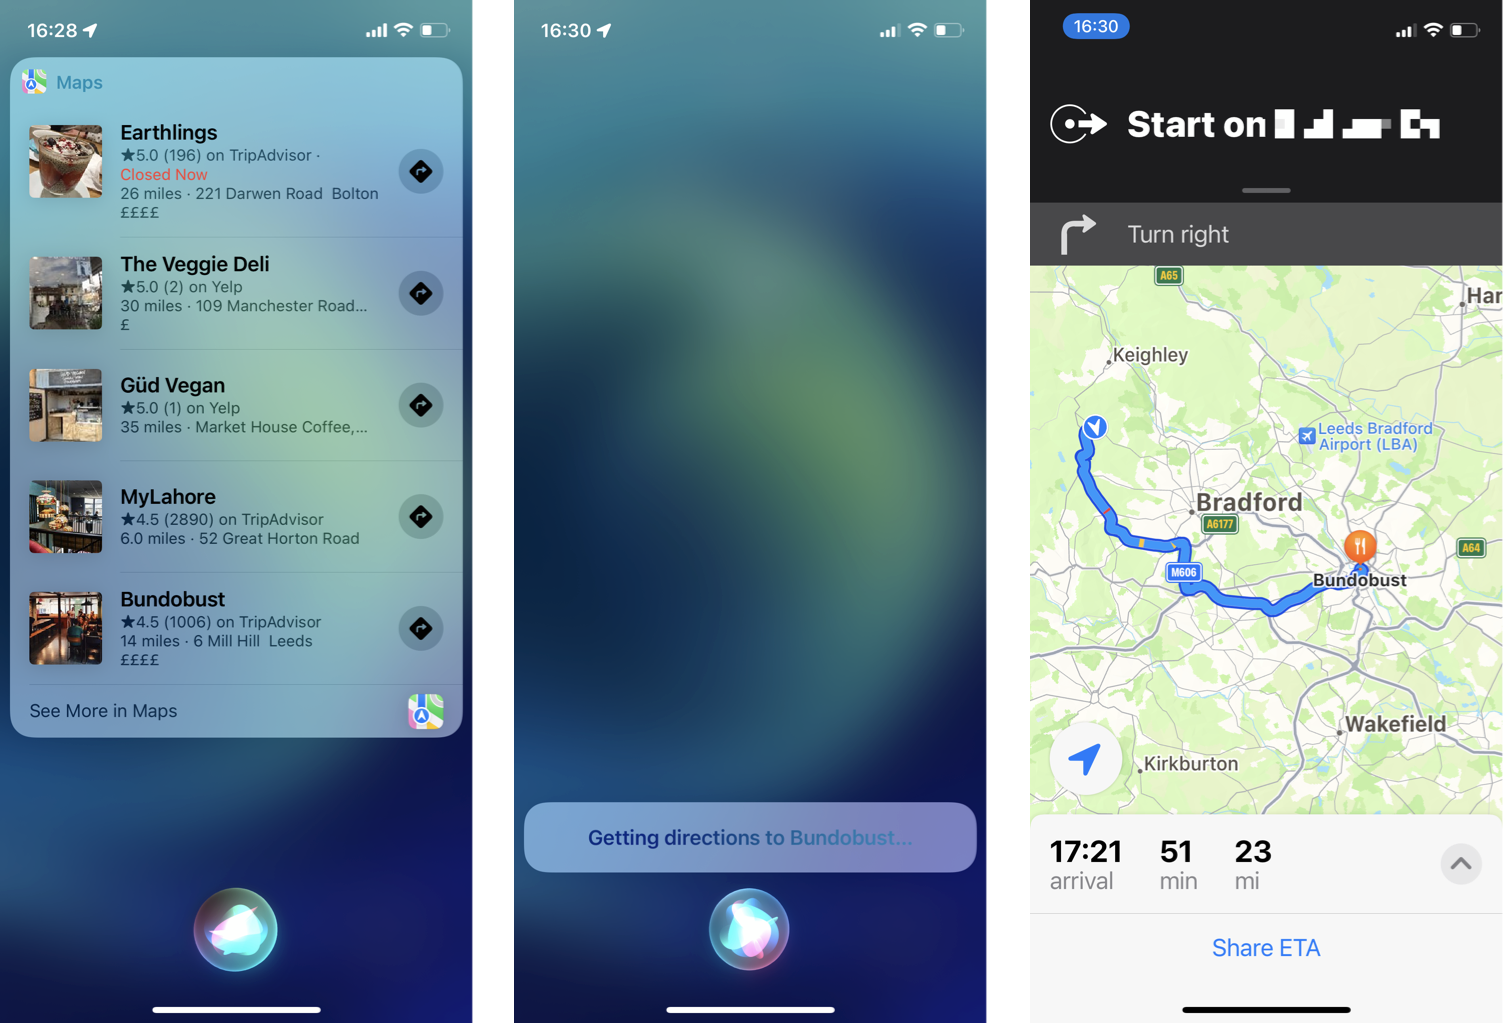 How To Use Maps With Siri to Find POI using Hey Siri: Showing list of results, saying Yes to fifth result, and asking for directions